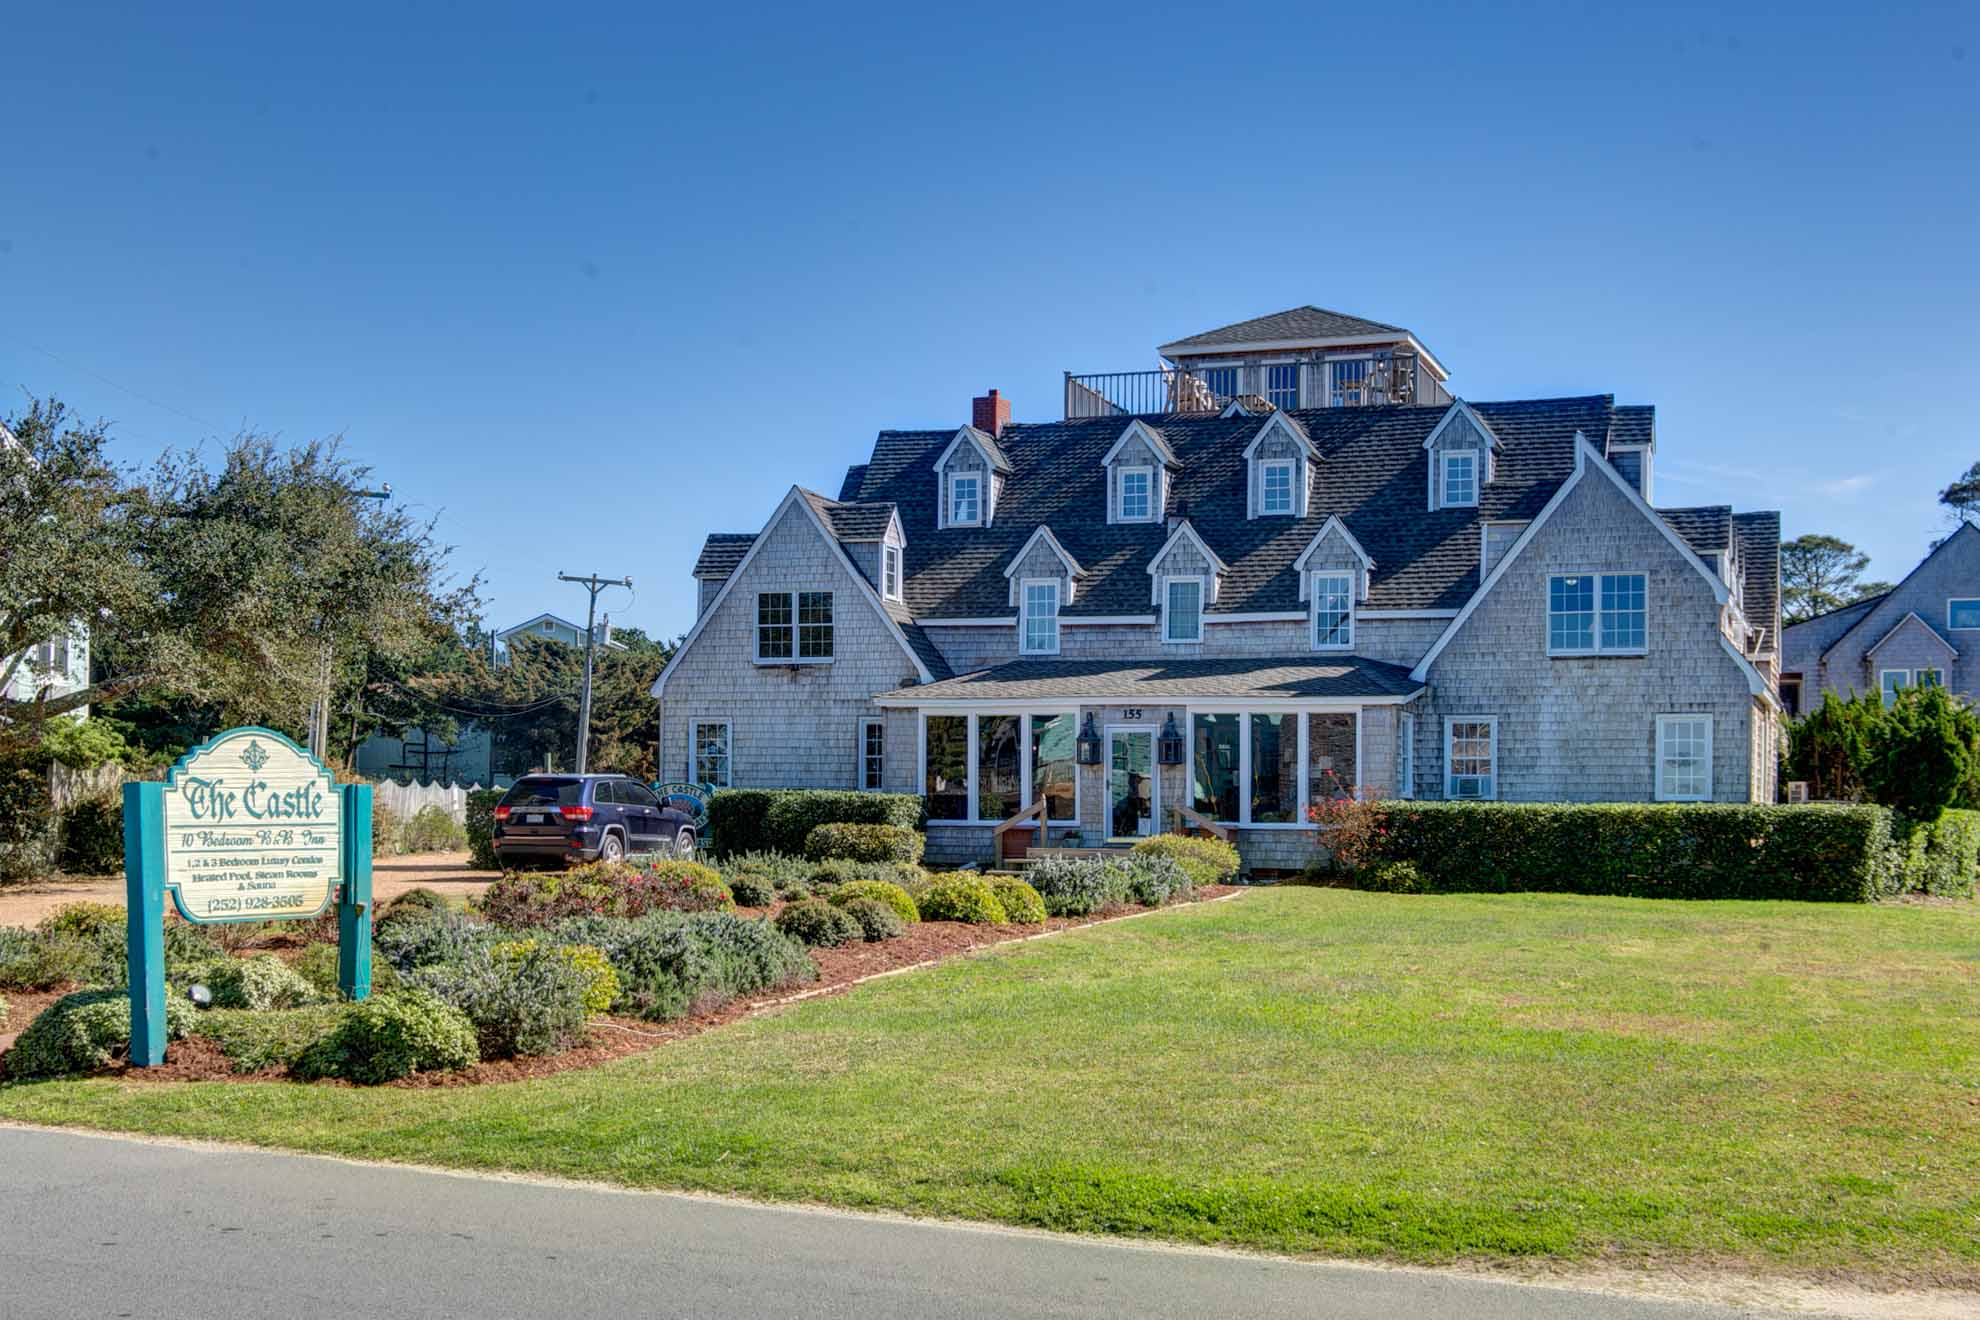 North-Carolina bed and breakfast inn for sale - The Castle on Silver Lake